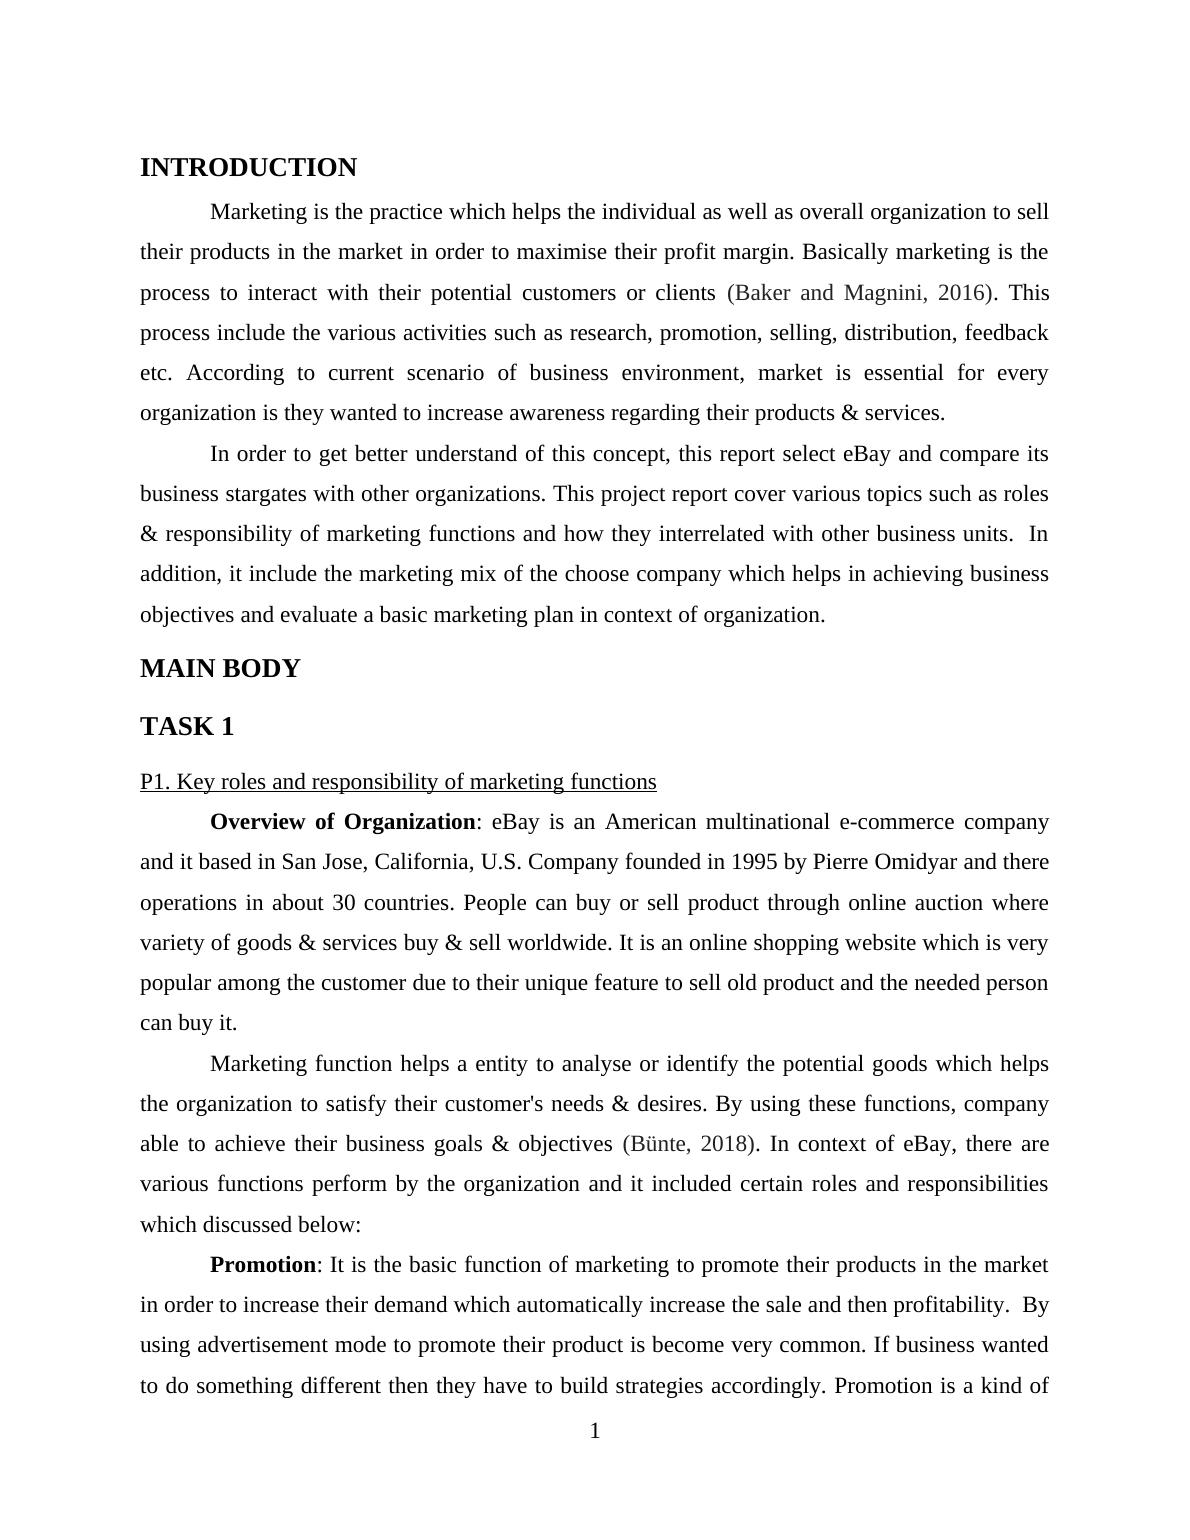 P1. Key roles and responsibility of marketing functions_3